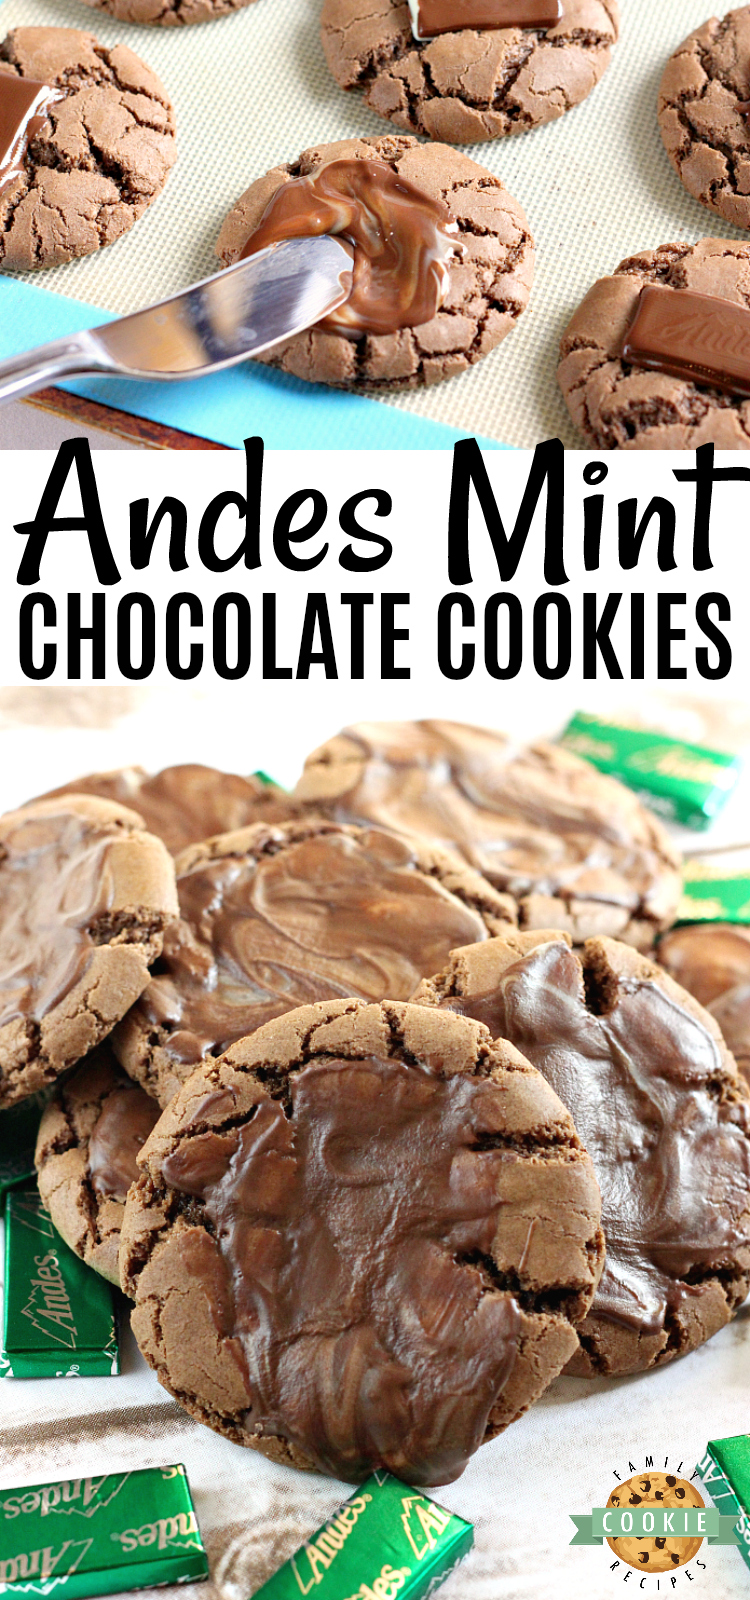 Andes Mint Chocolate Cookies are chewy, chocolate and frosted with a melted Andes mint! These cookies have the perfect combination of chocolate and mint flavors - this is one of my favorite cookie recipes!